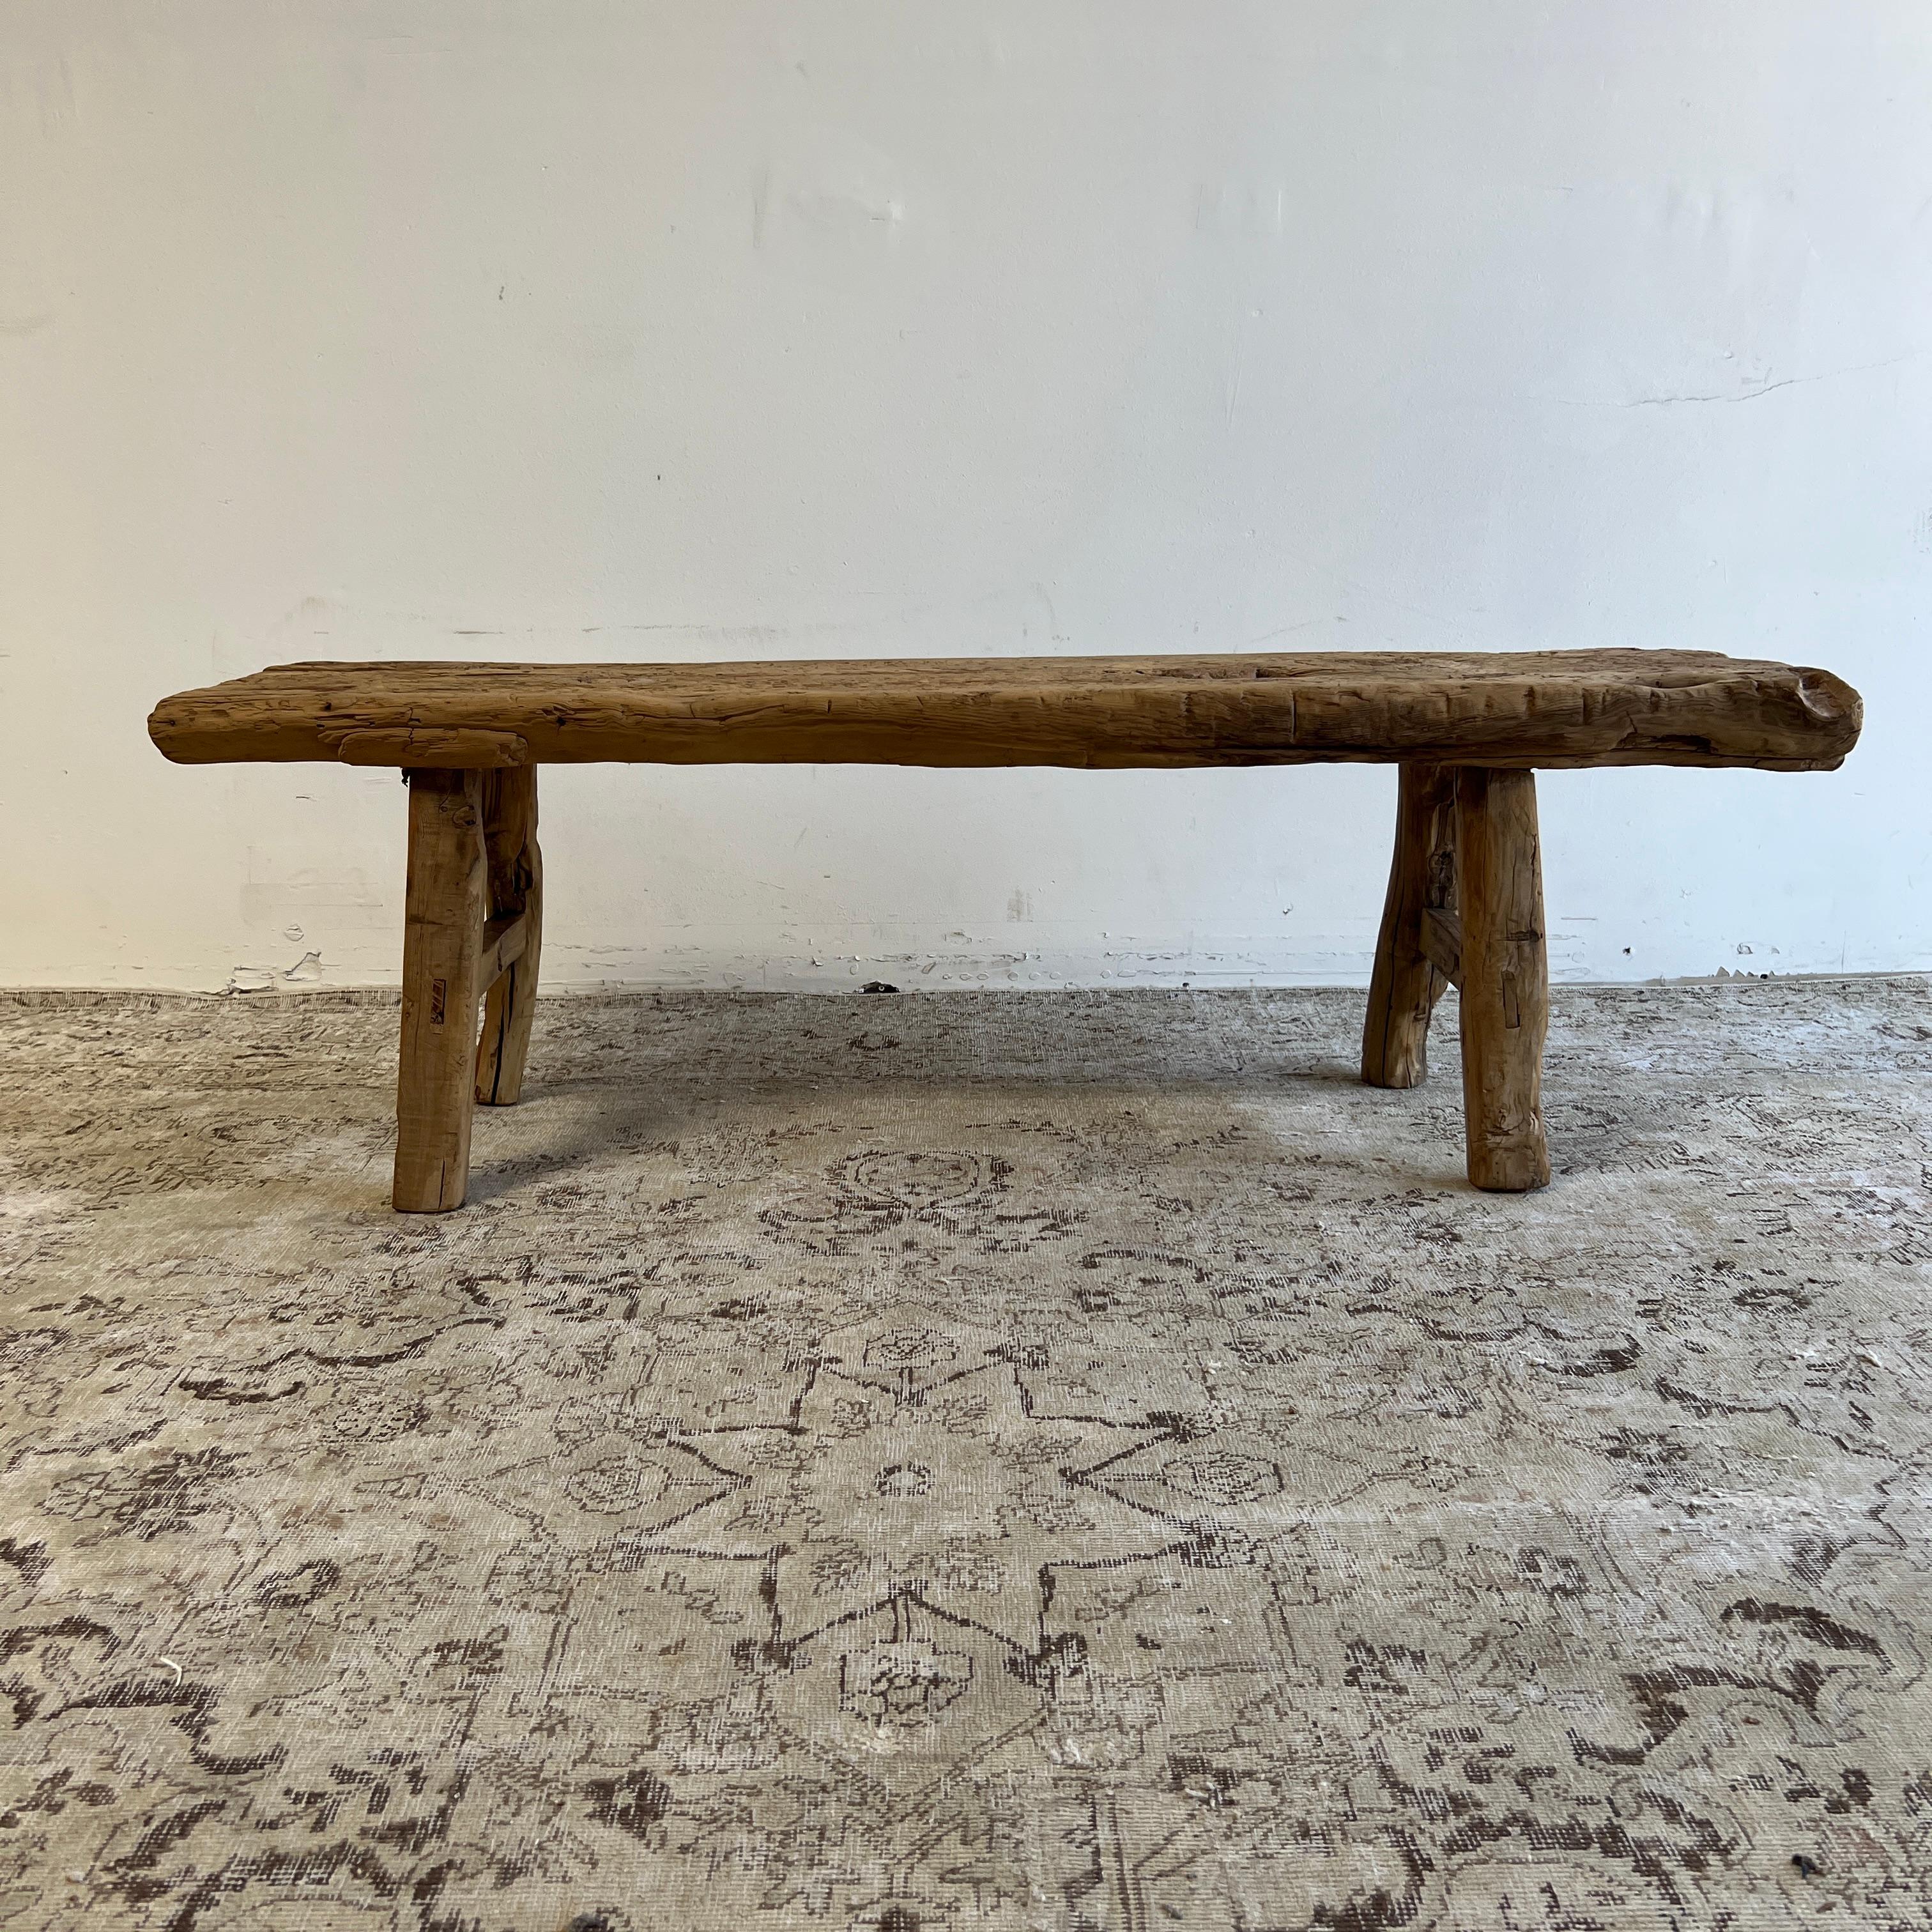 Vintage antique Elm wood bench or coffee table.
Unique thick elm wood top, with natural age and patina.
These are the real vintage antique elm wood benches! Beautiful antique patina, with weathering and age, these are solid and sturdy ready for